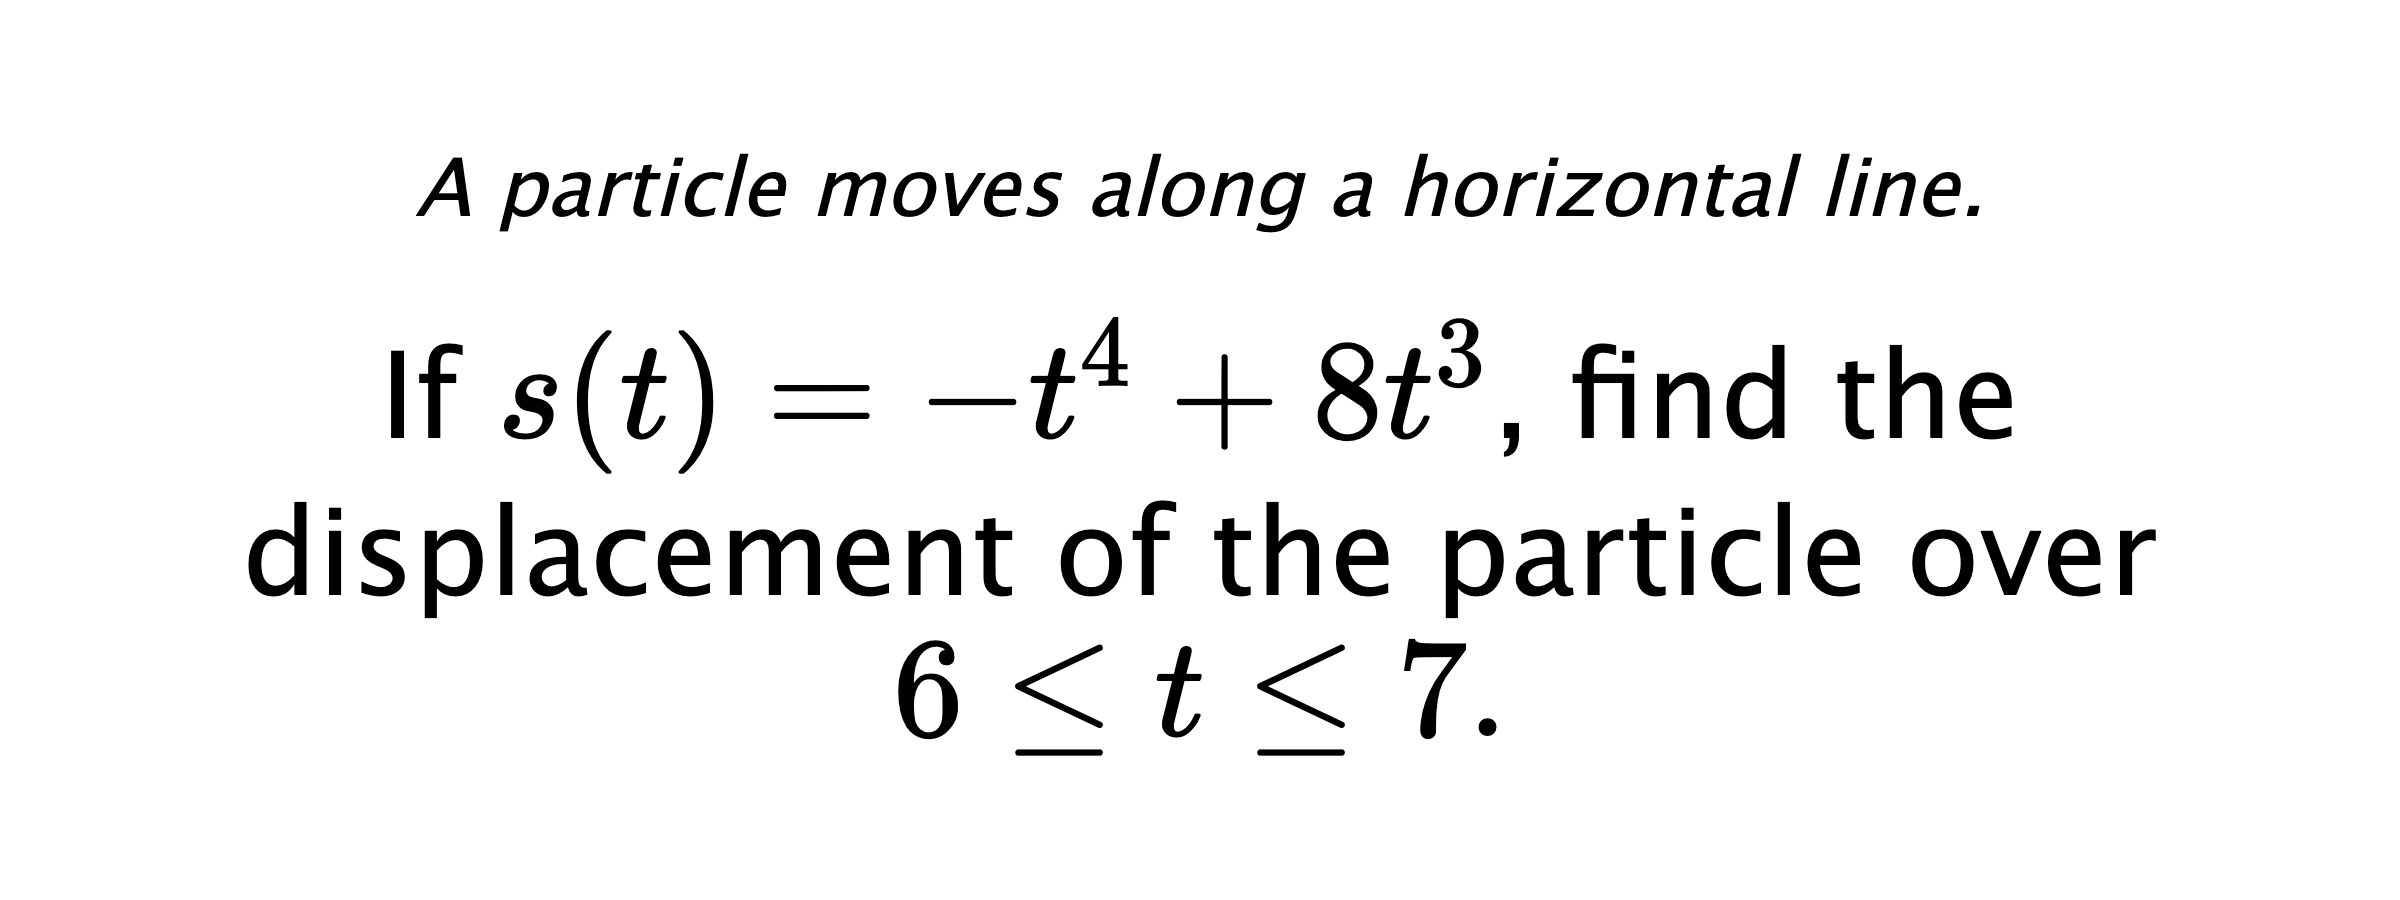 A particle moves along a horizontal line. If $ s(t)=-t^4+8t^3 $, find the displacement of the particle over $ 6 \leq t \leq 7 .$